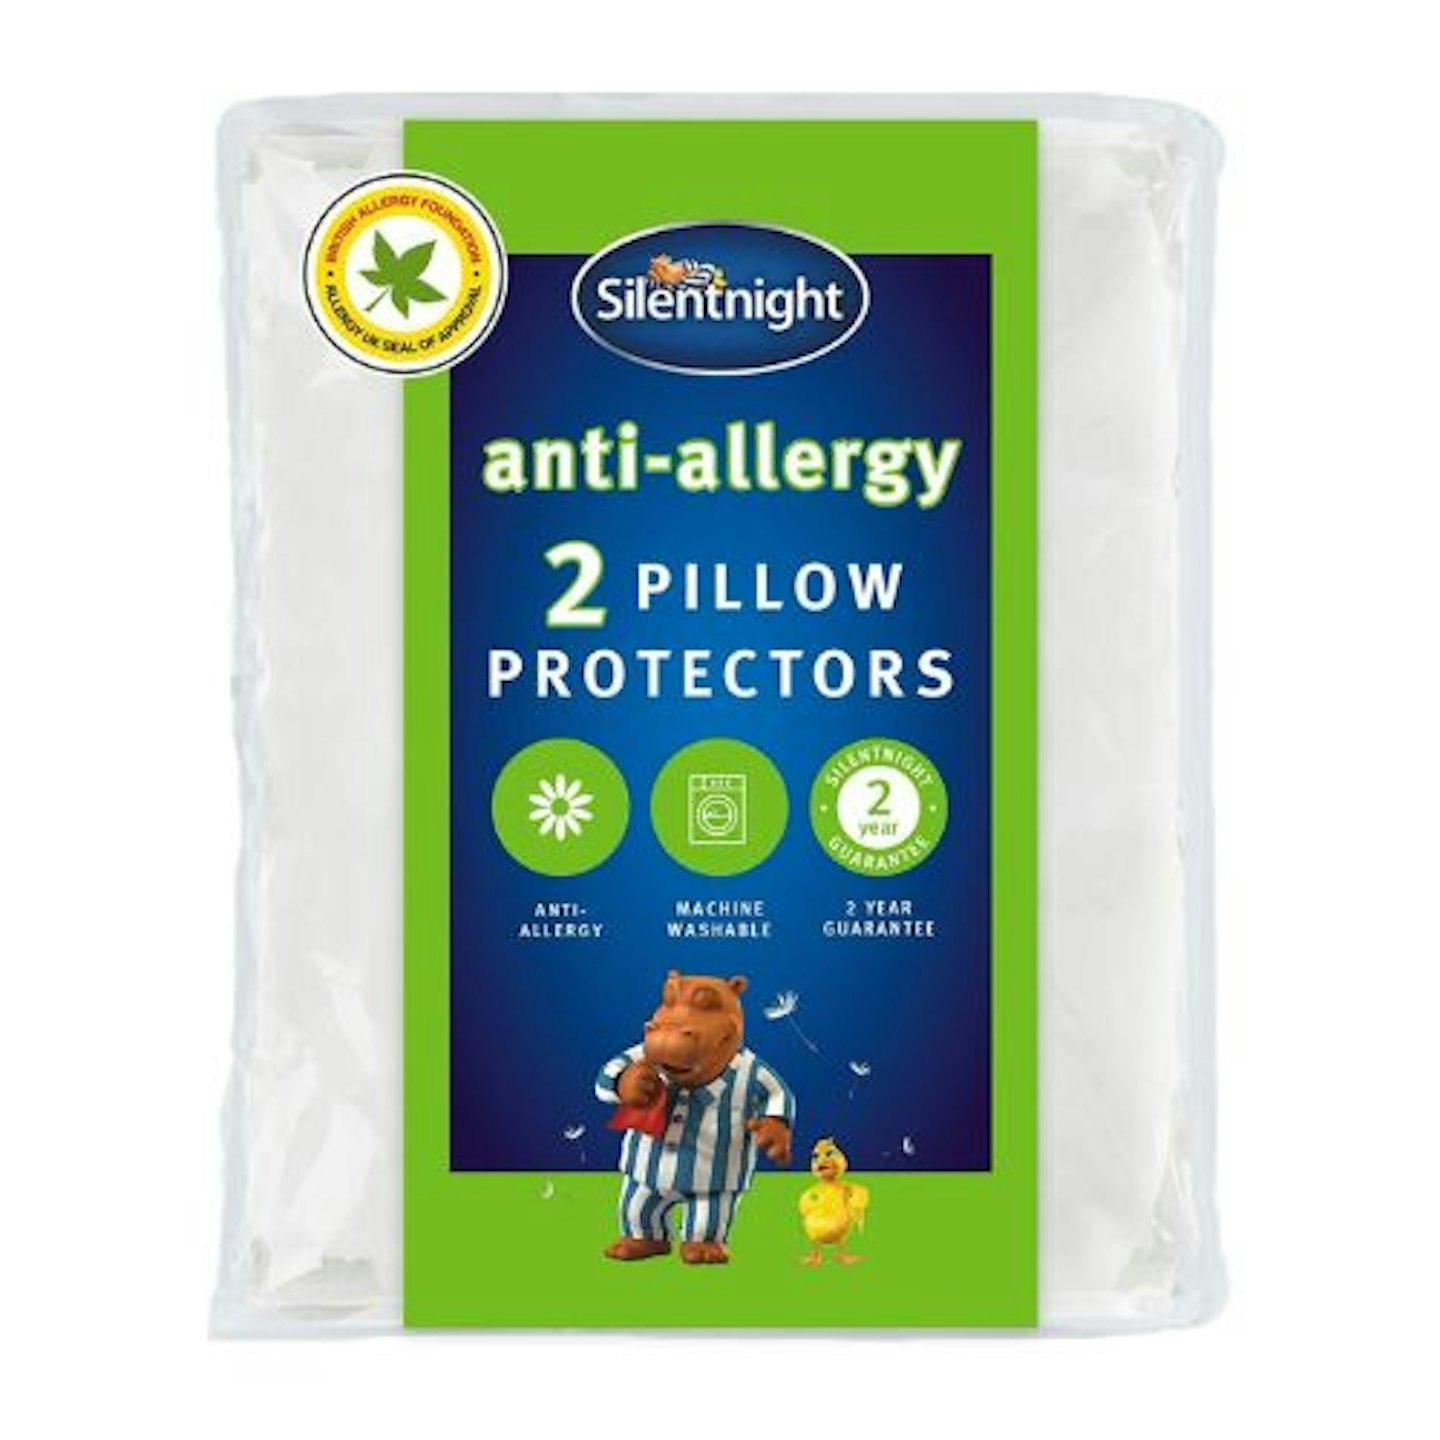 Silentnight Anti-Allergy Pillow Protectors – Pack of 2 Quilted Pillow Protectors with Anti-Allergy and Anti-Bacterial Fibres to Prevent Allergies – Machine Washable, White